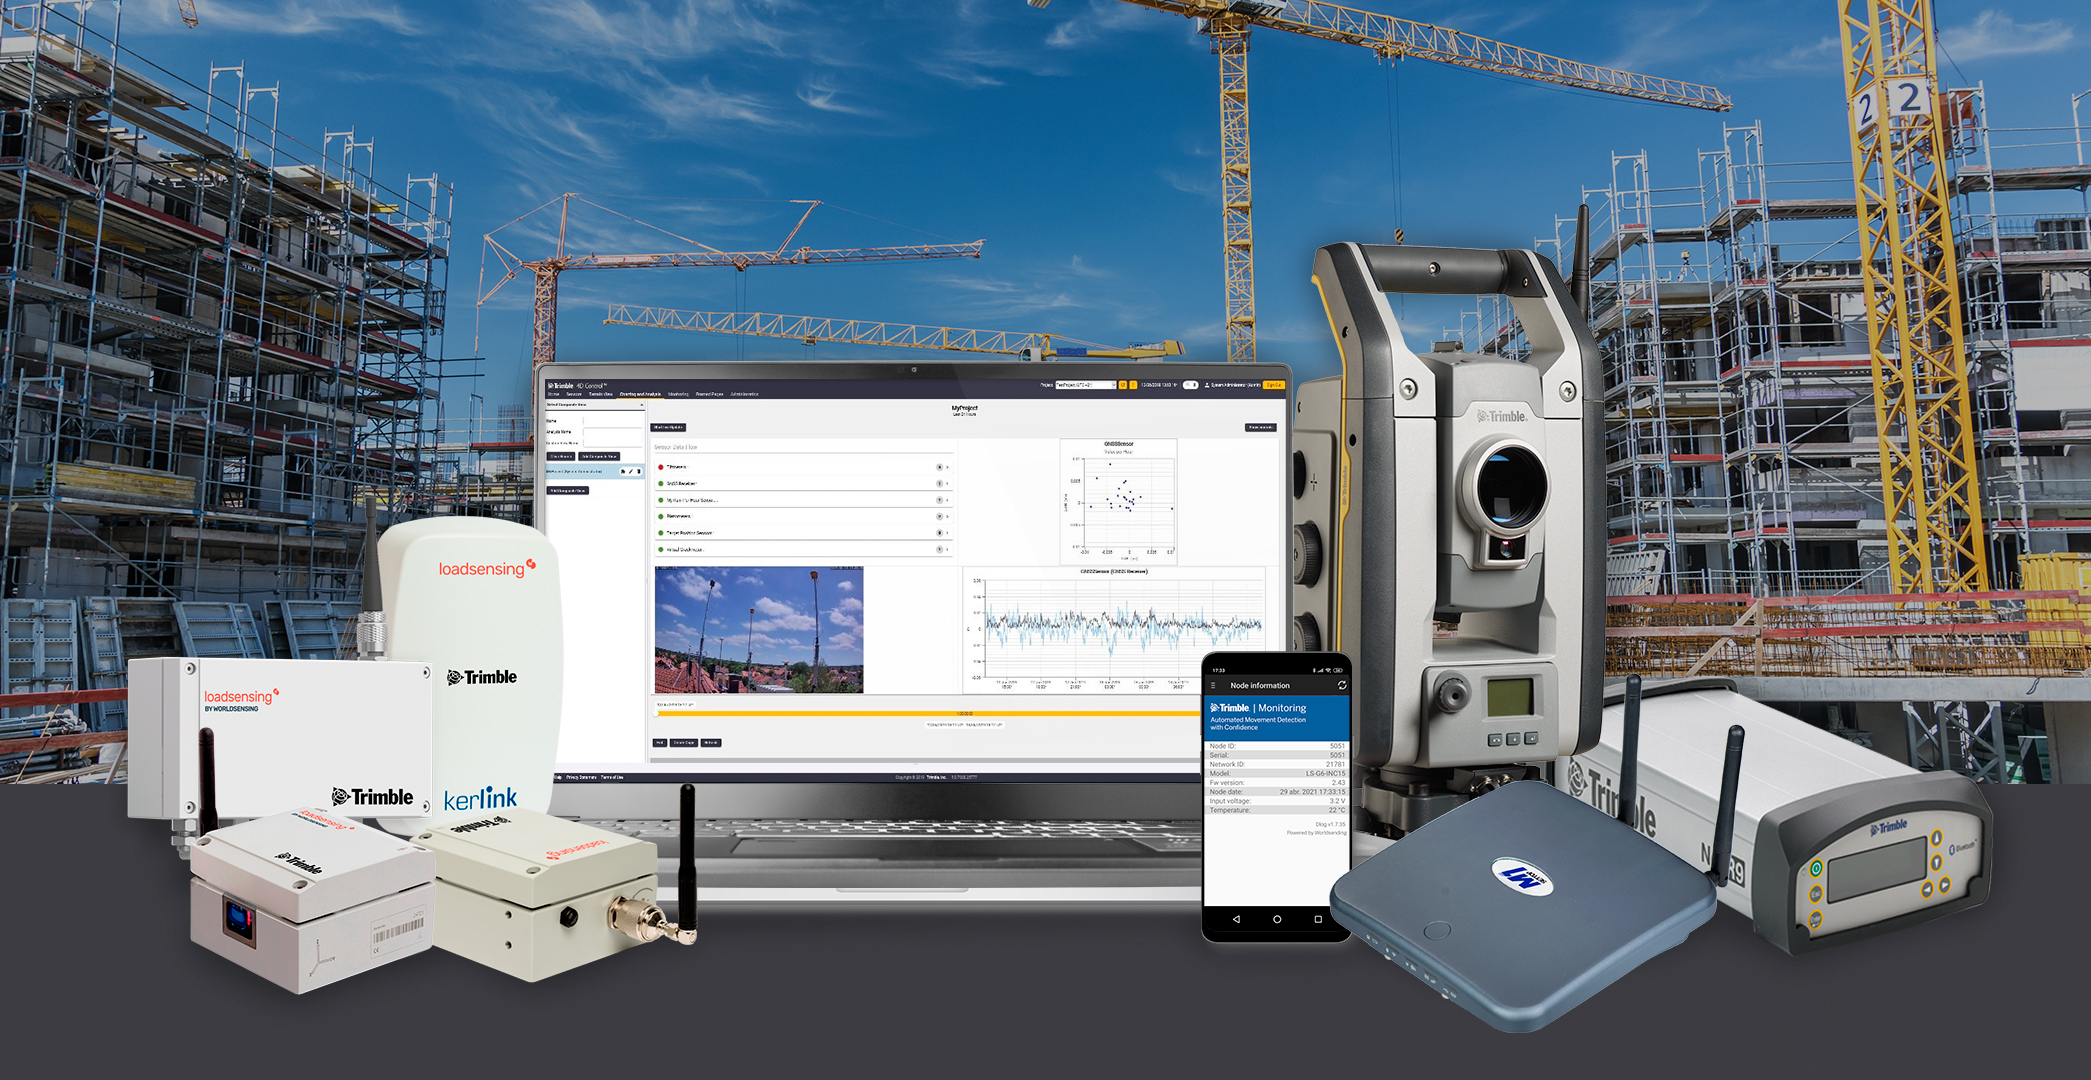 Worldsensing supports the expansion of Trimble’s geotechnical automated monitoring portfolio with geotechnical IoT technology